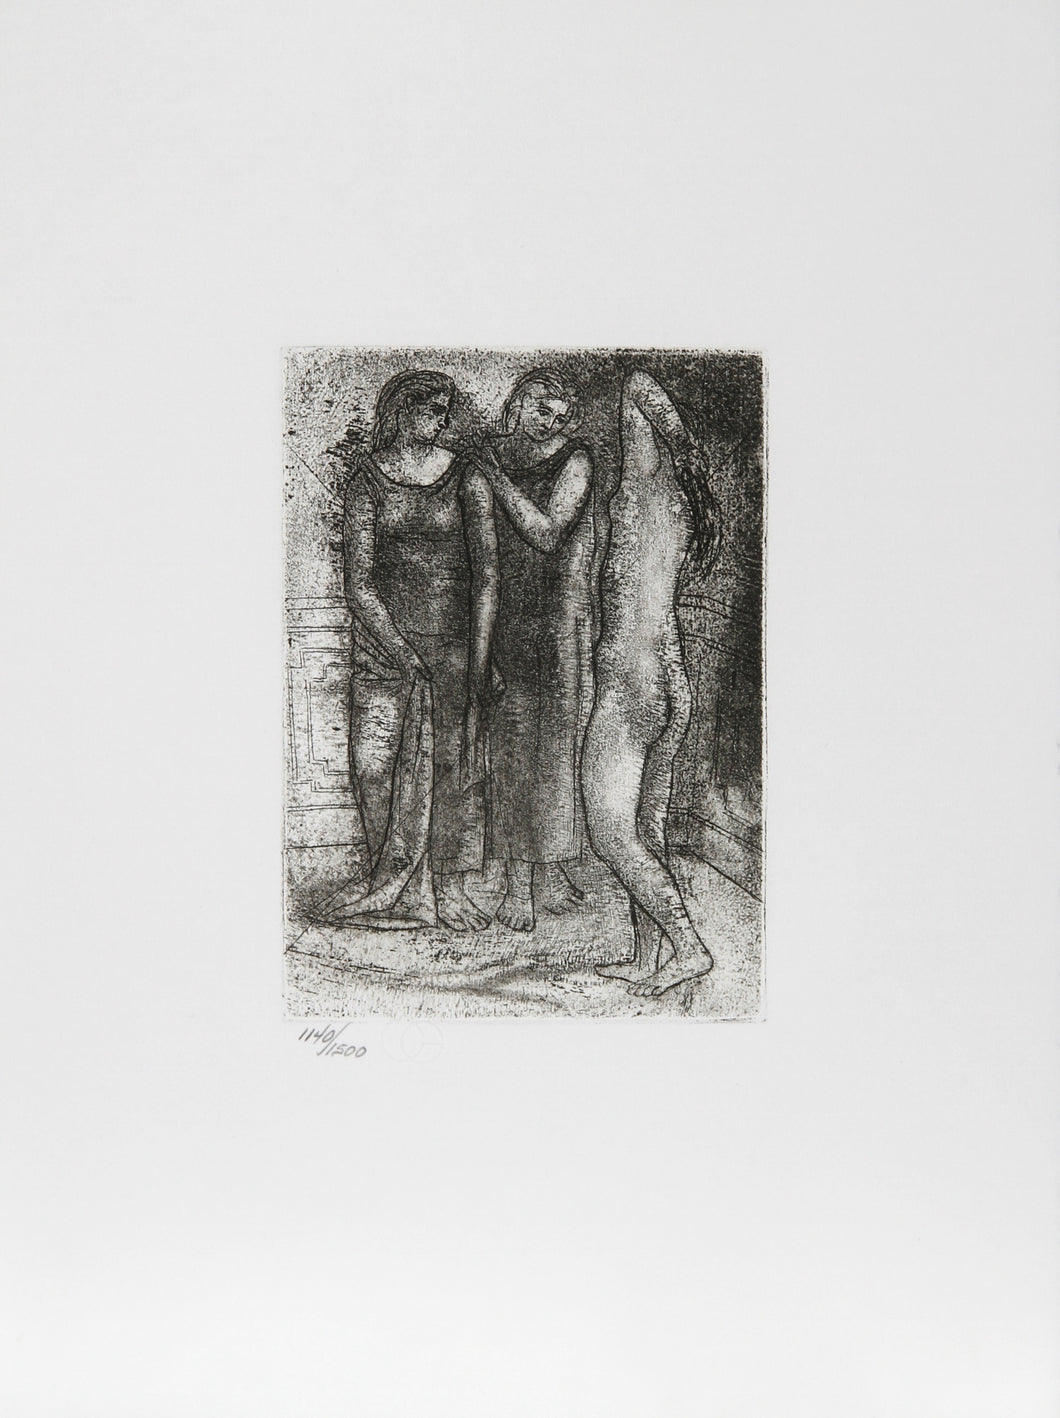 Pablo Picasso, Groupe de Trois Femmes, Restrike Etching, numbered in pencil w/ blindstamp